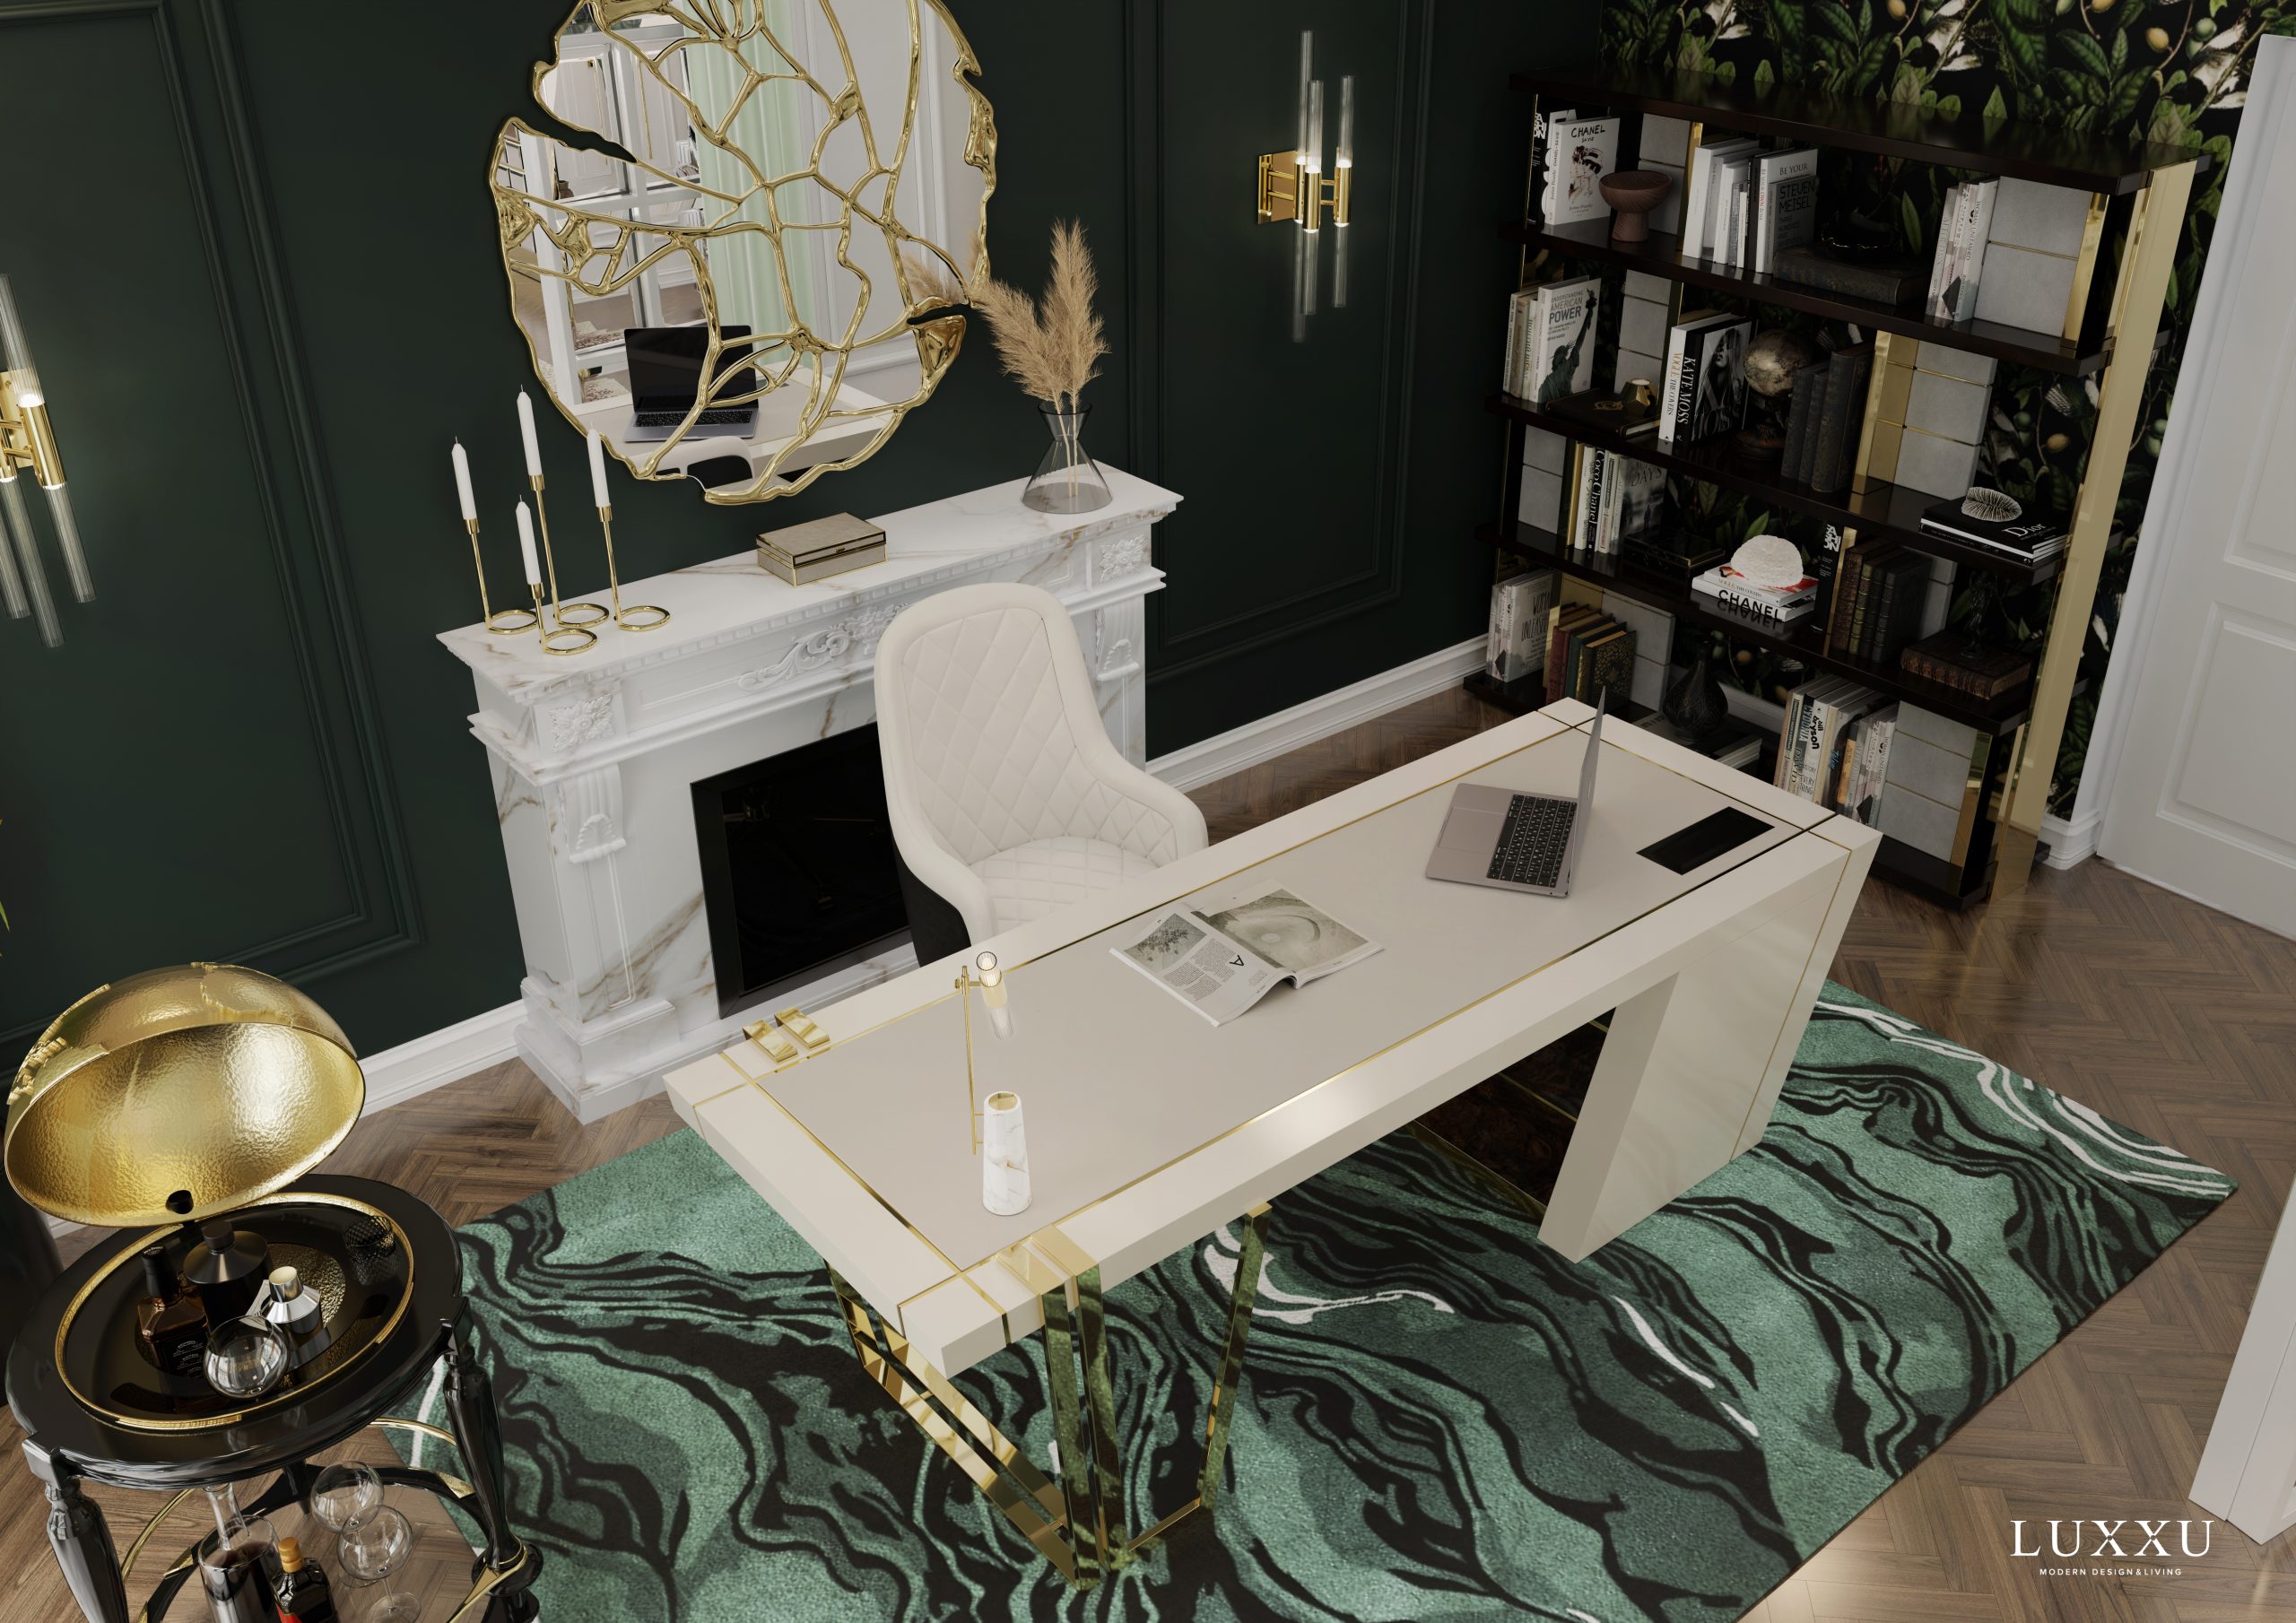 BEHOLD THE UNMISTAKABLE STYLE OF THIS LUXURIOUS HOME OFFICE